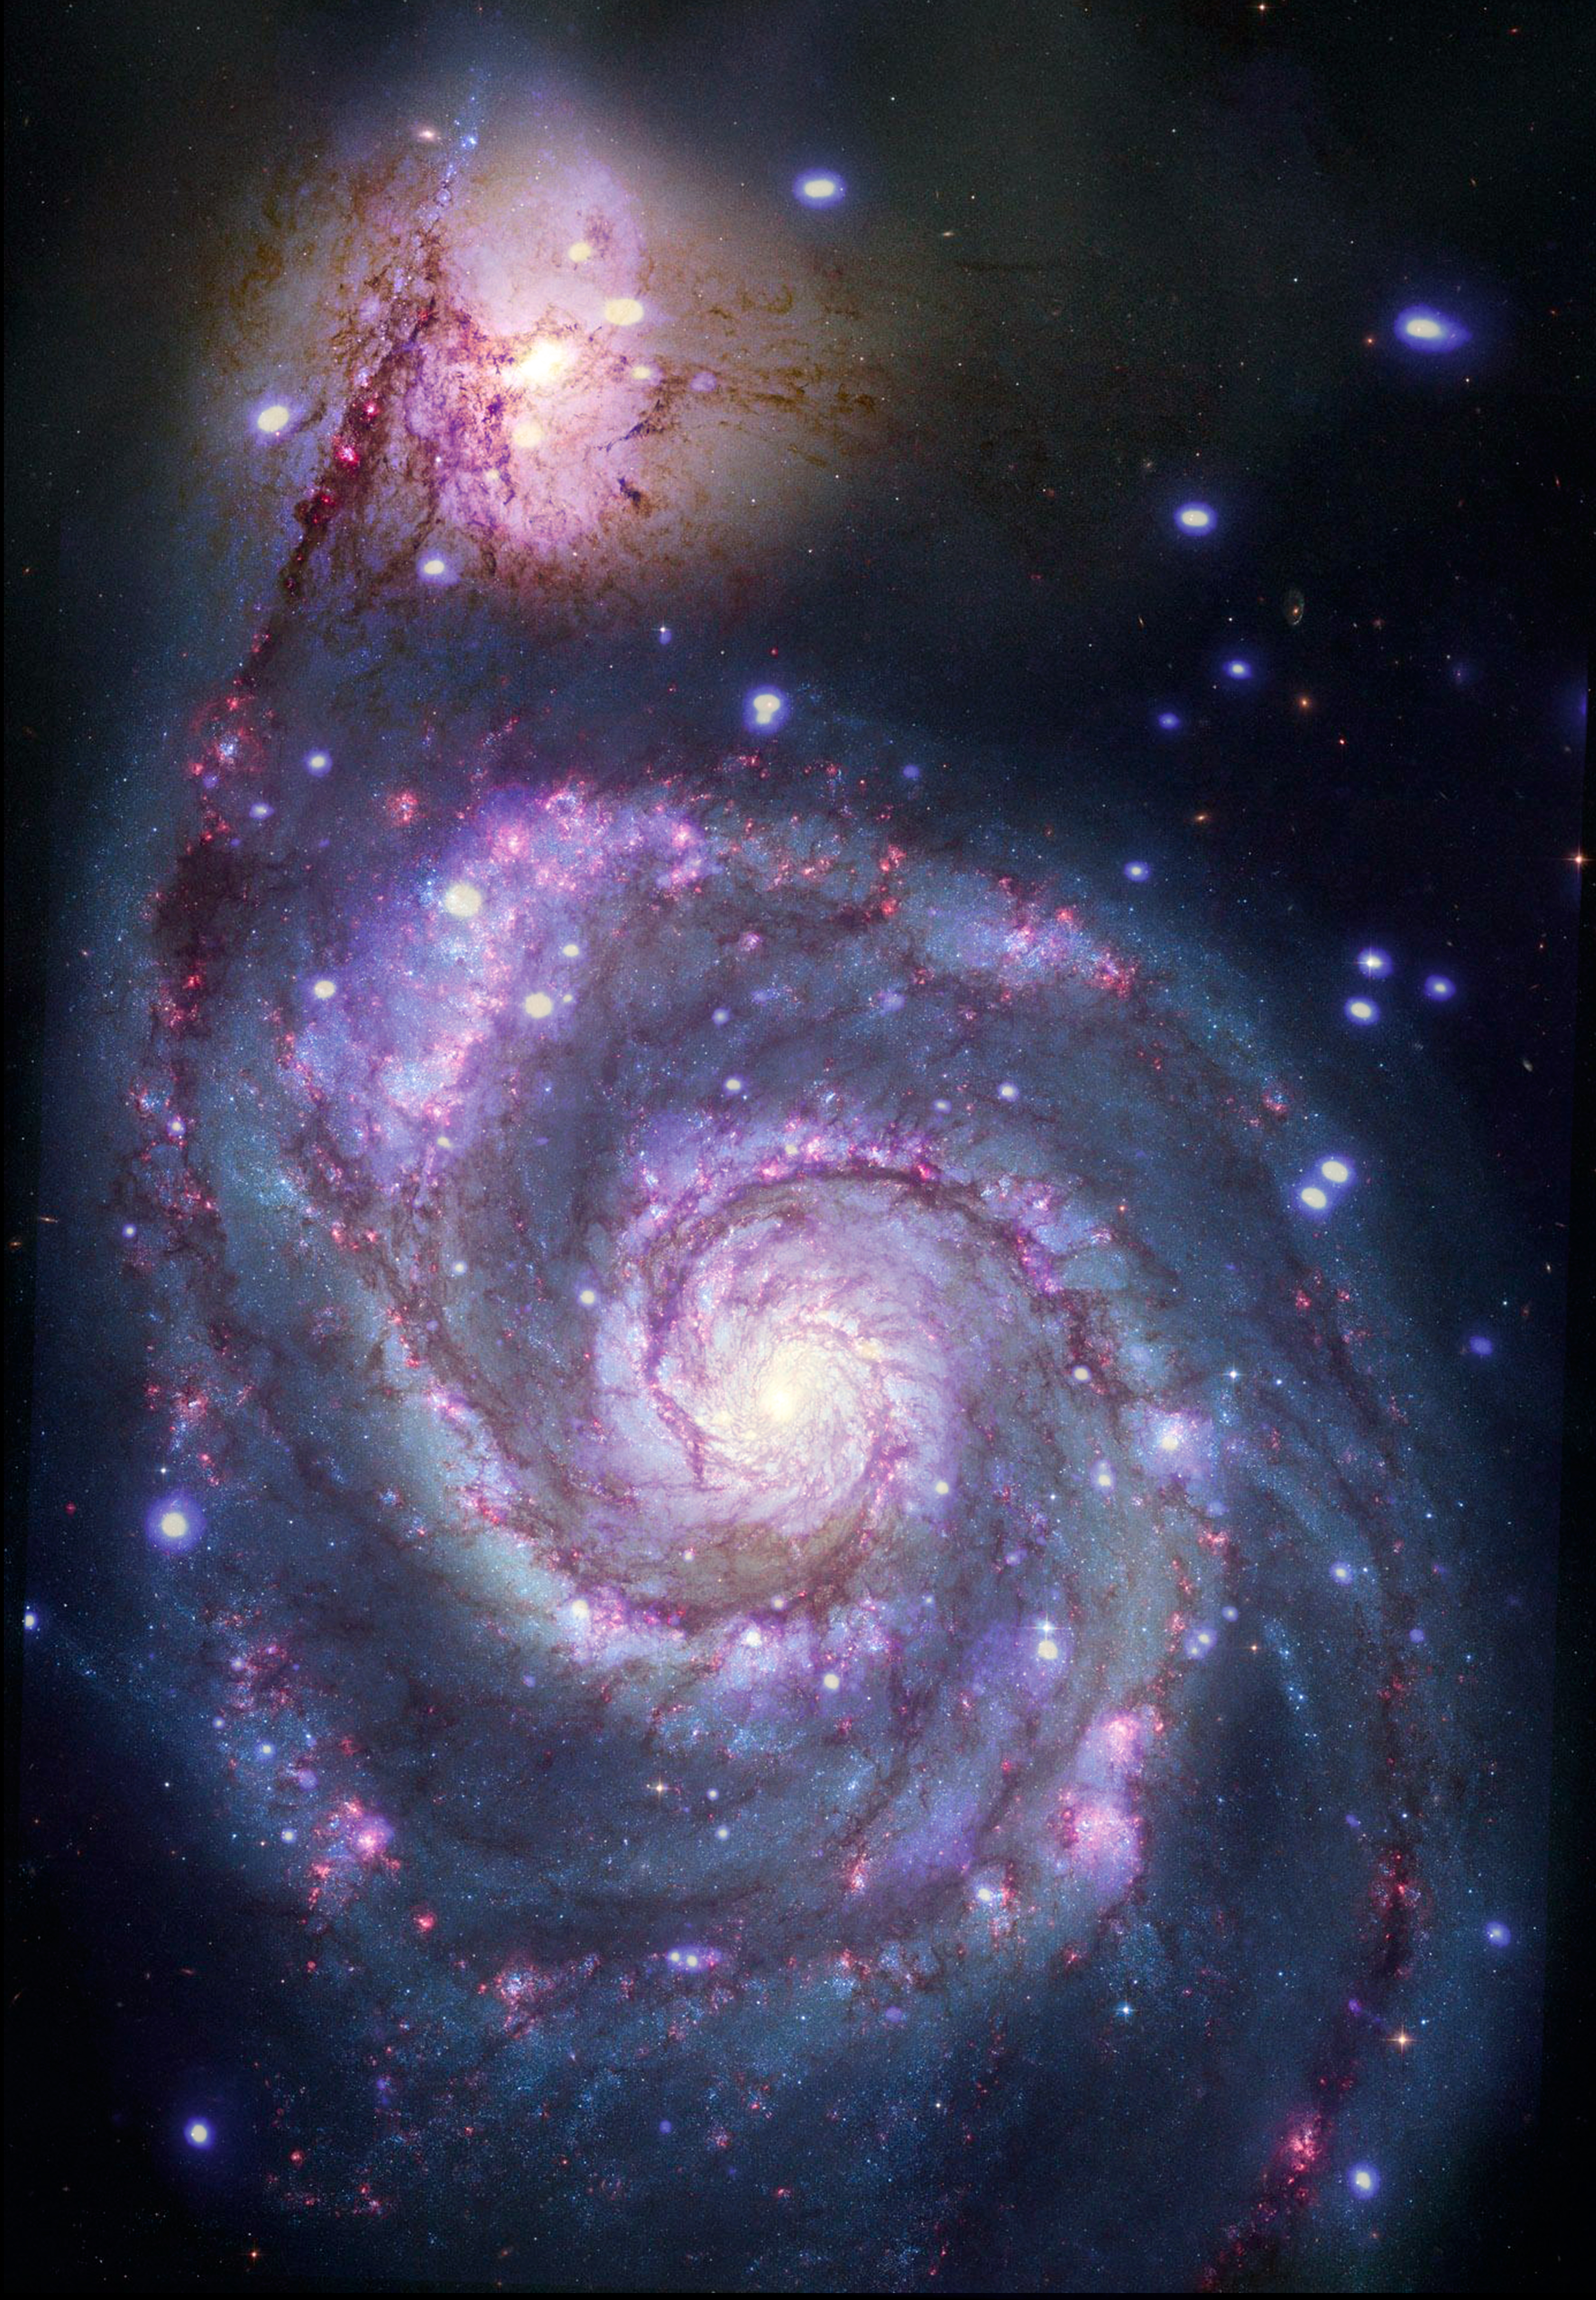 A composite image of M51 galaxy.